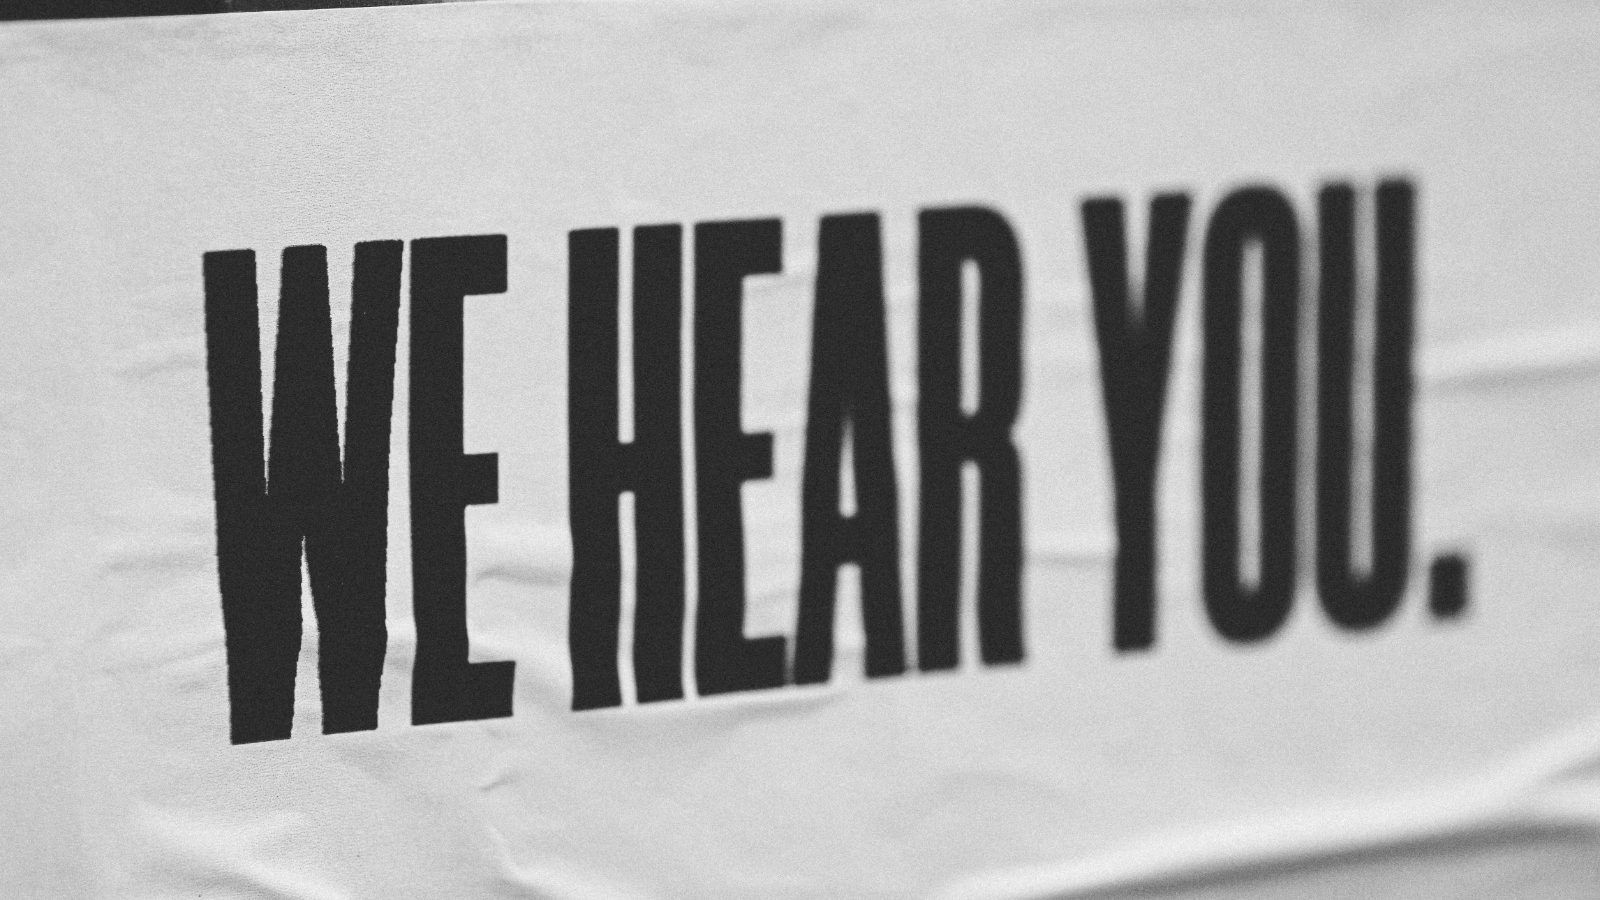 We Hear You written in black over a white background cloth banner